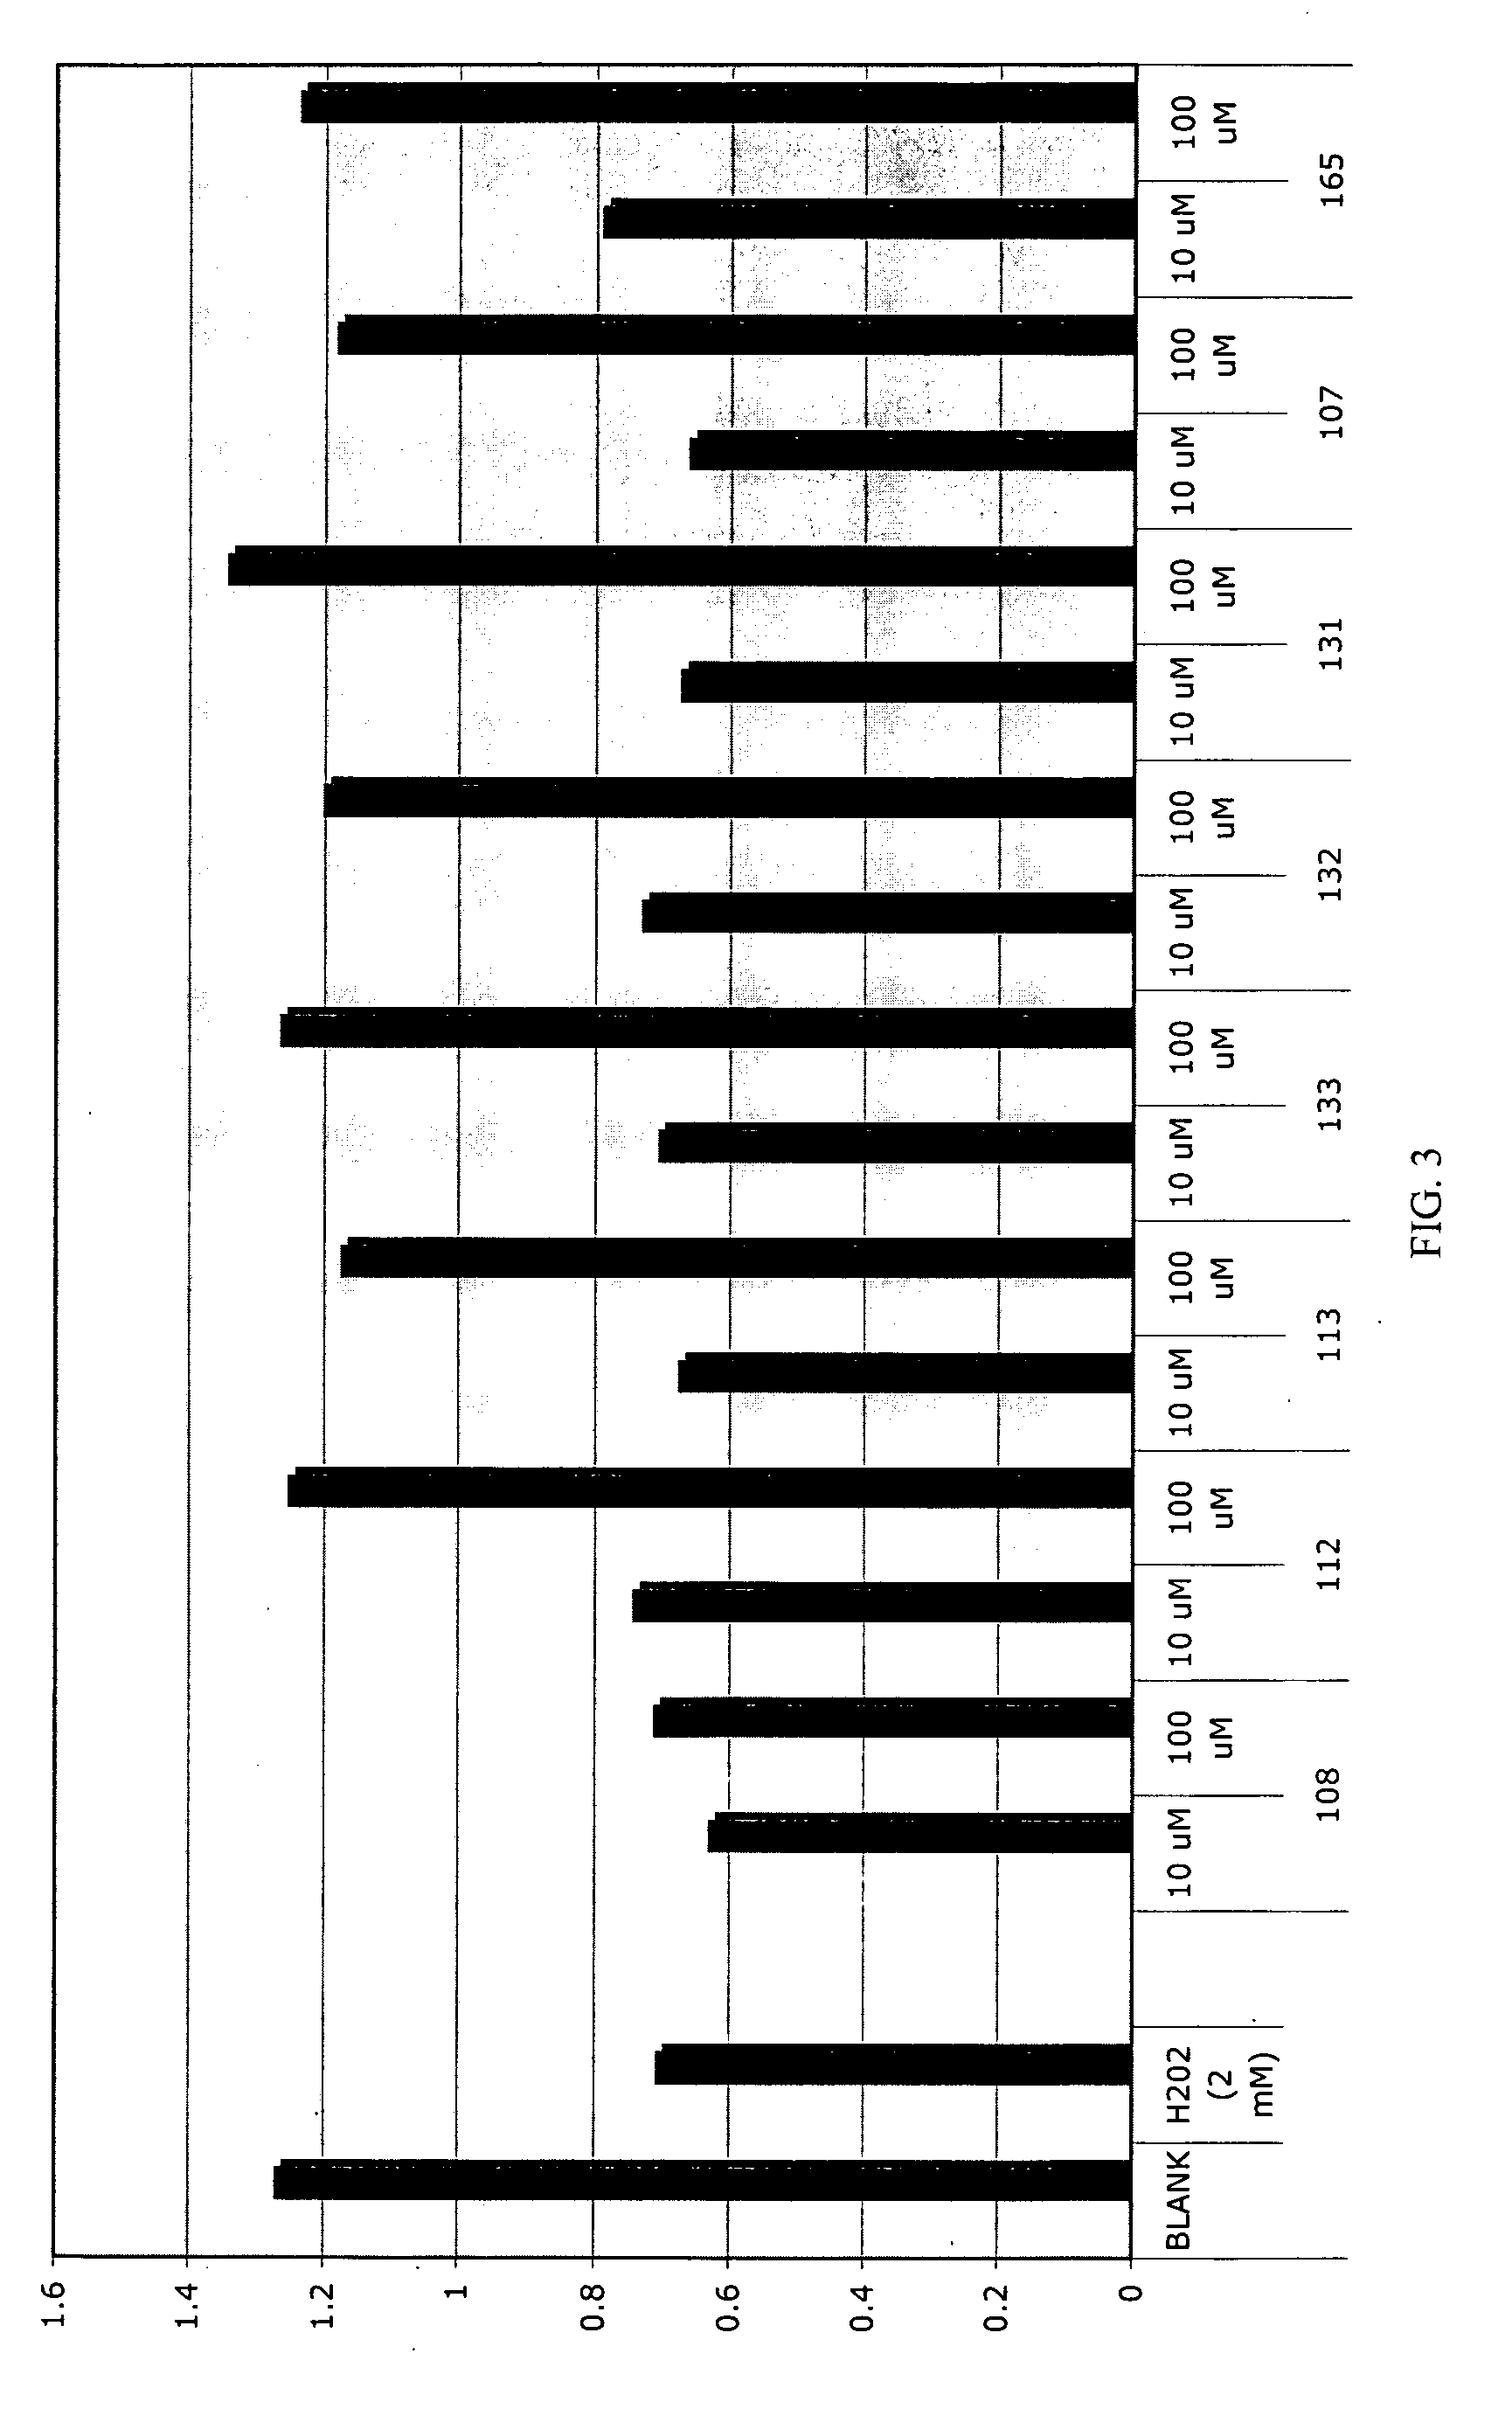 N-benzyl substituted pyridyl porphyrin compounds and methods of use thereof